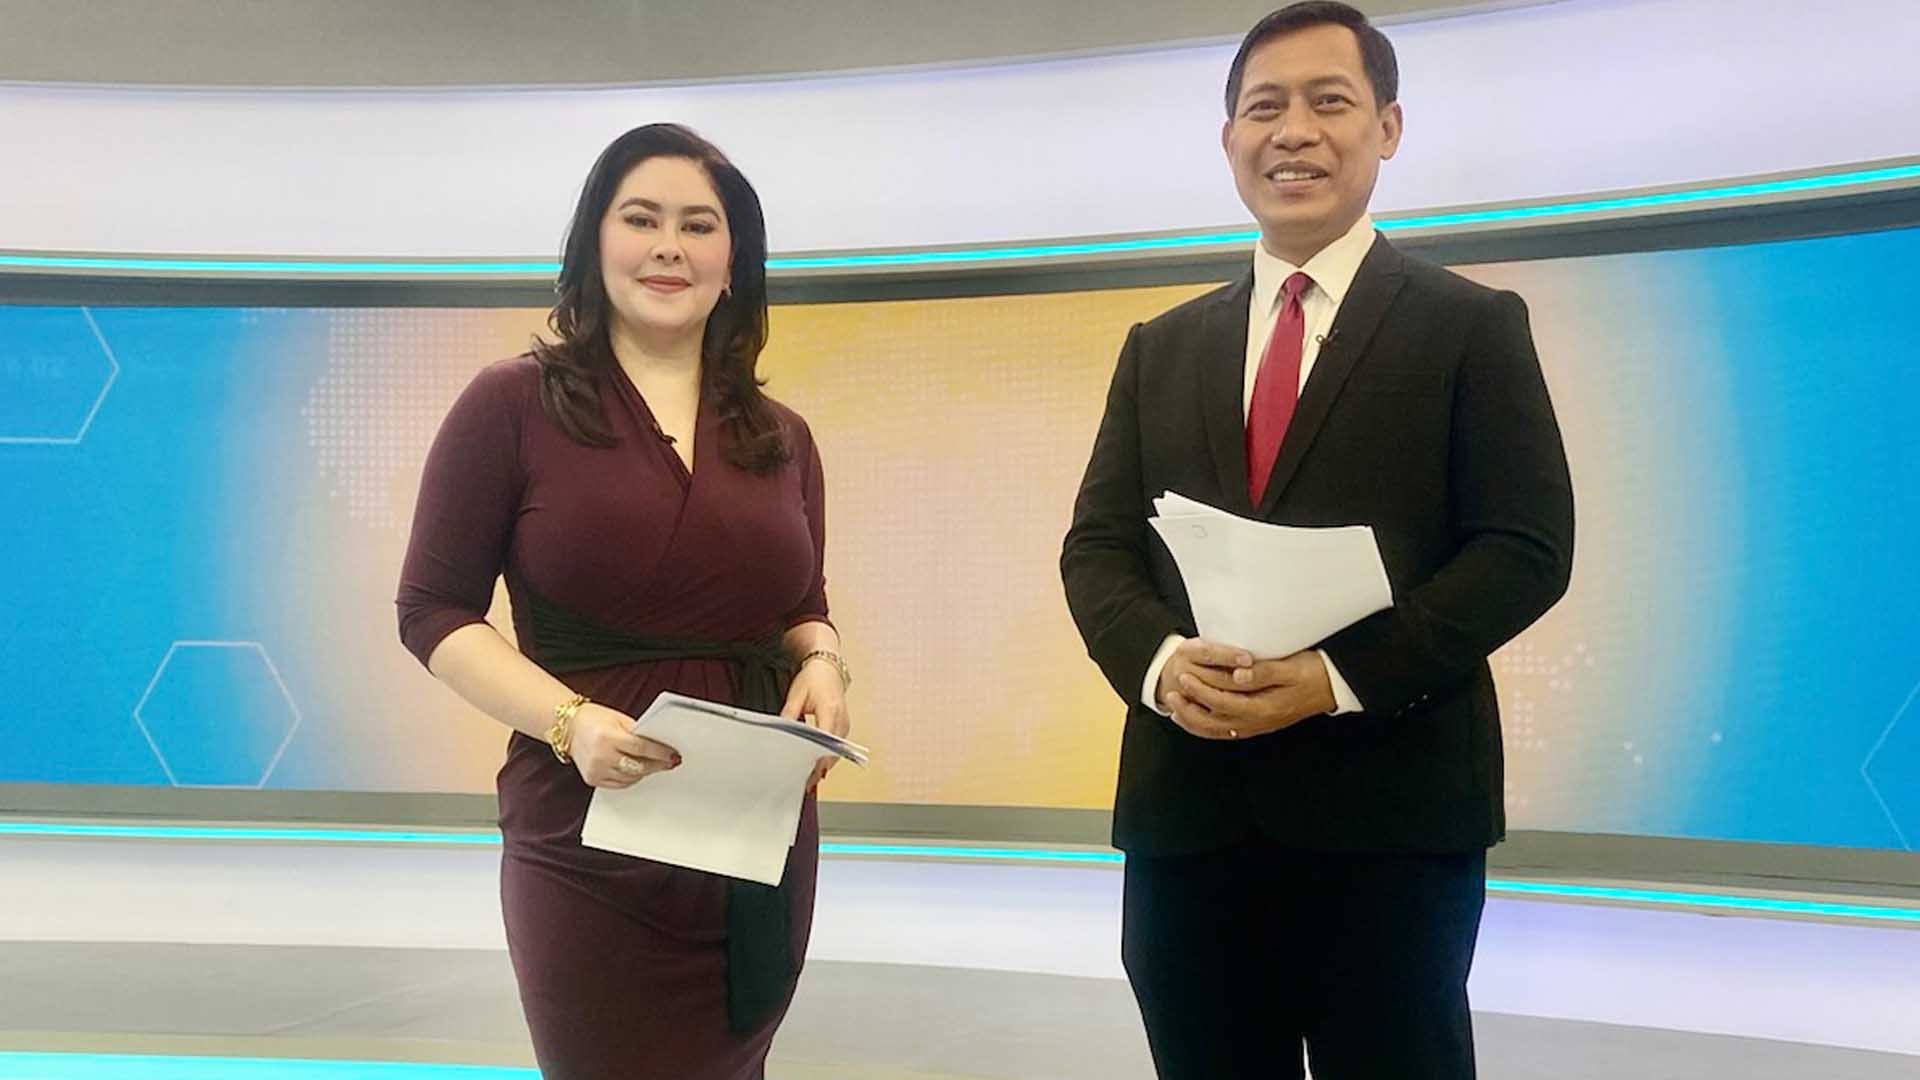 Raffy Tima And Connie Sison On What Makes The Midday Newscast Successful | PAGEONE